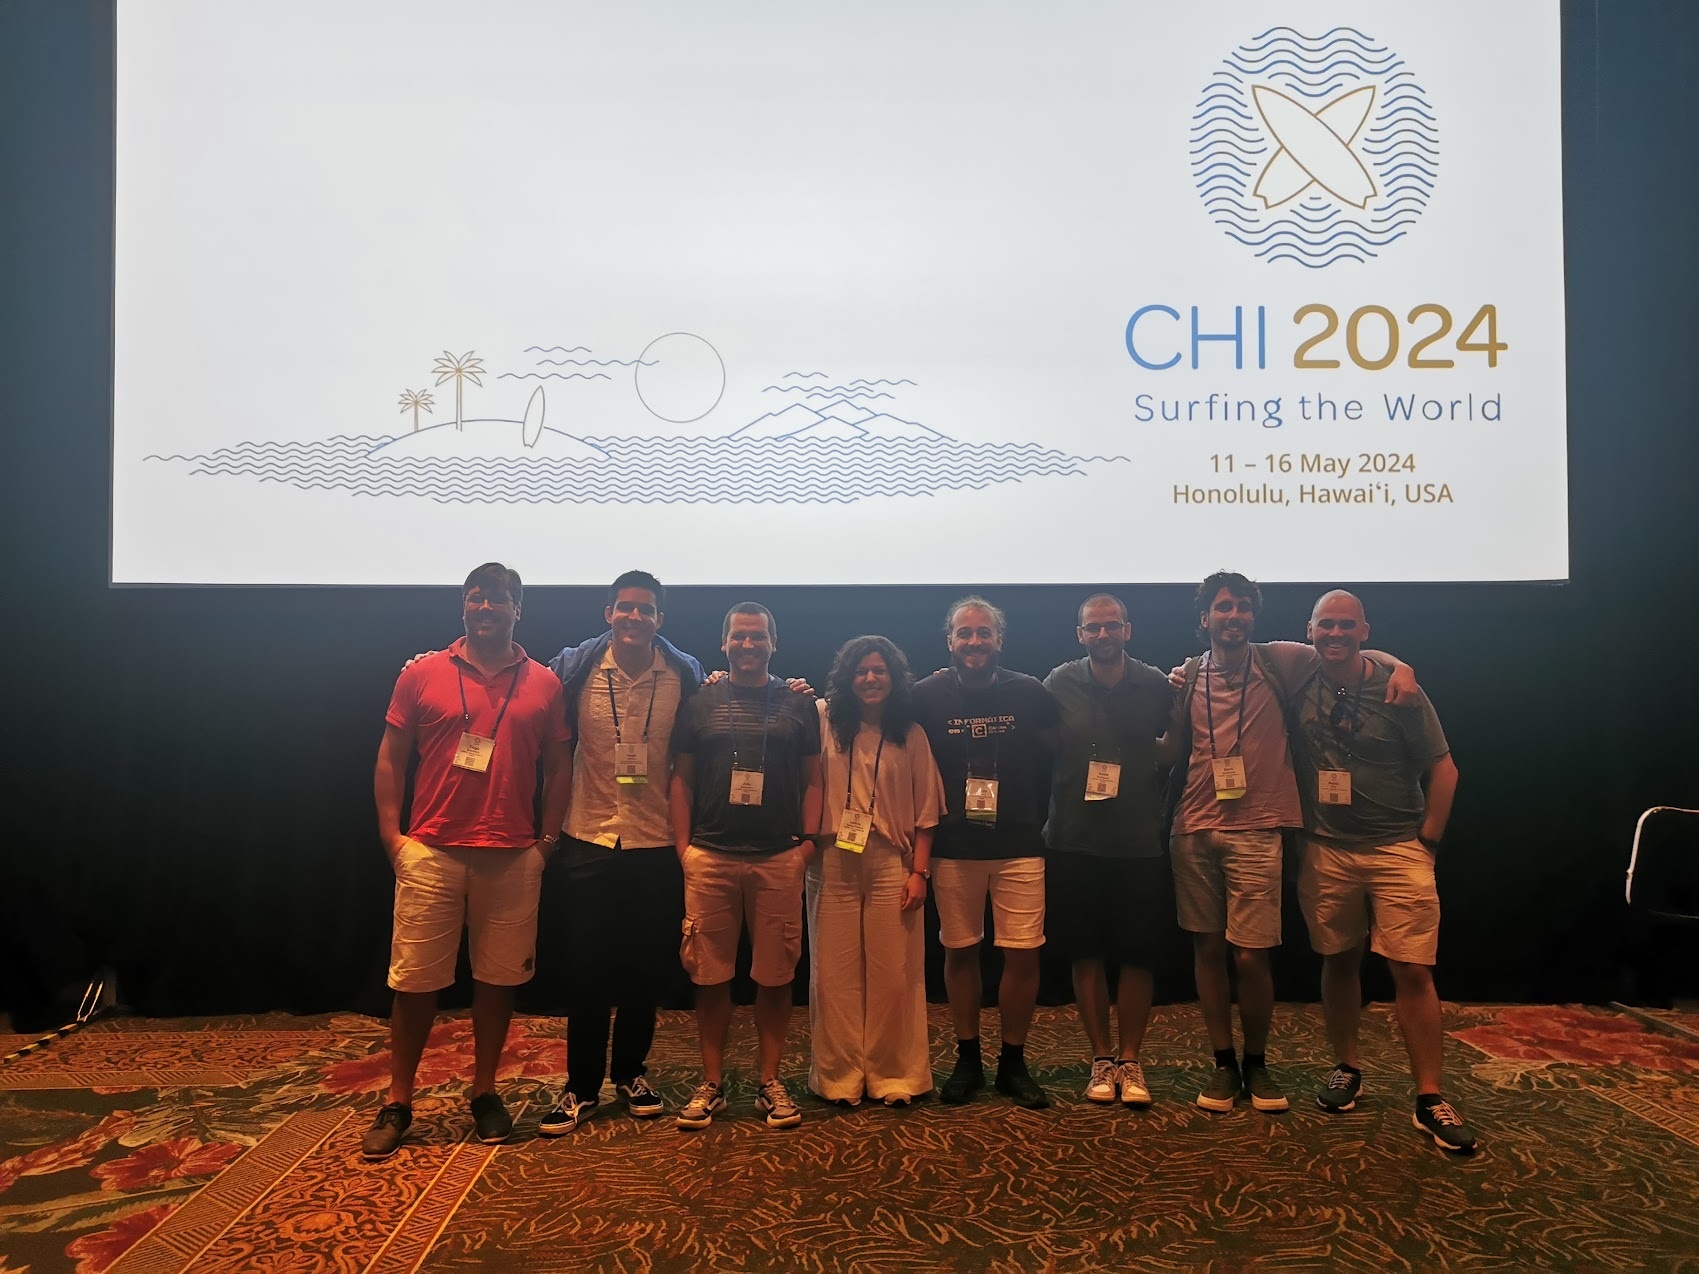 LASIGE with 5 Full Papers at CHI 2024